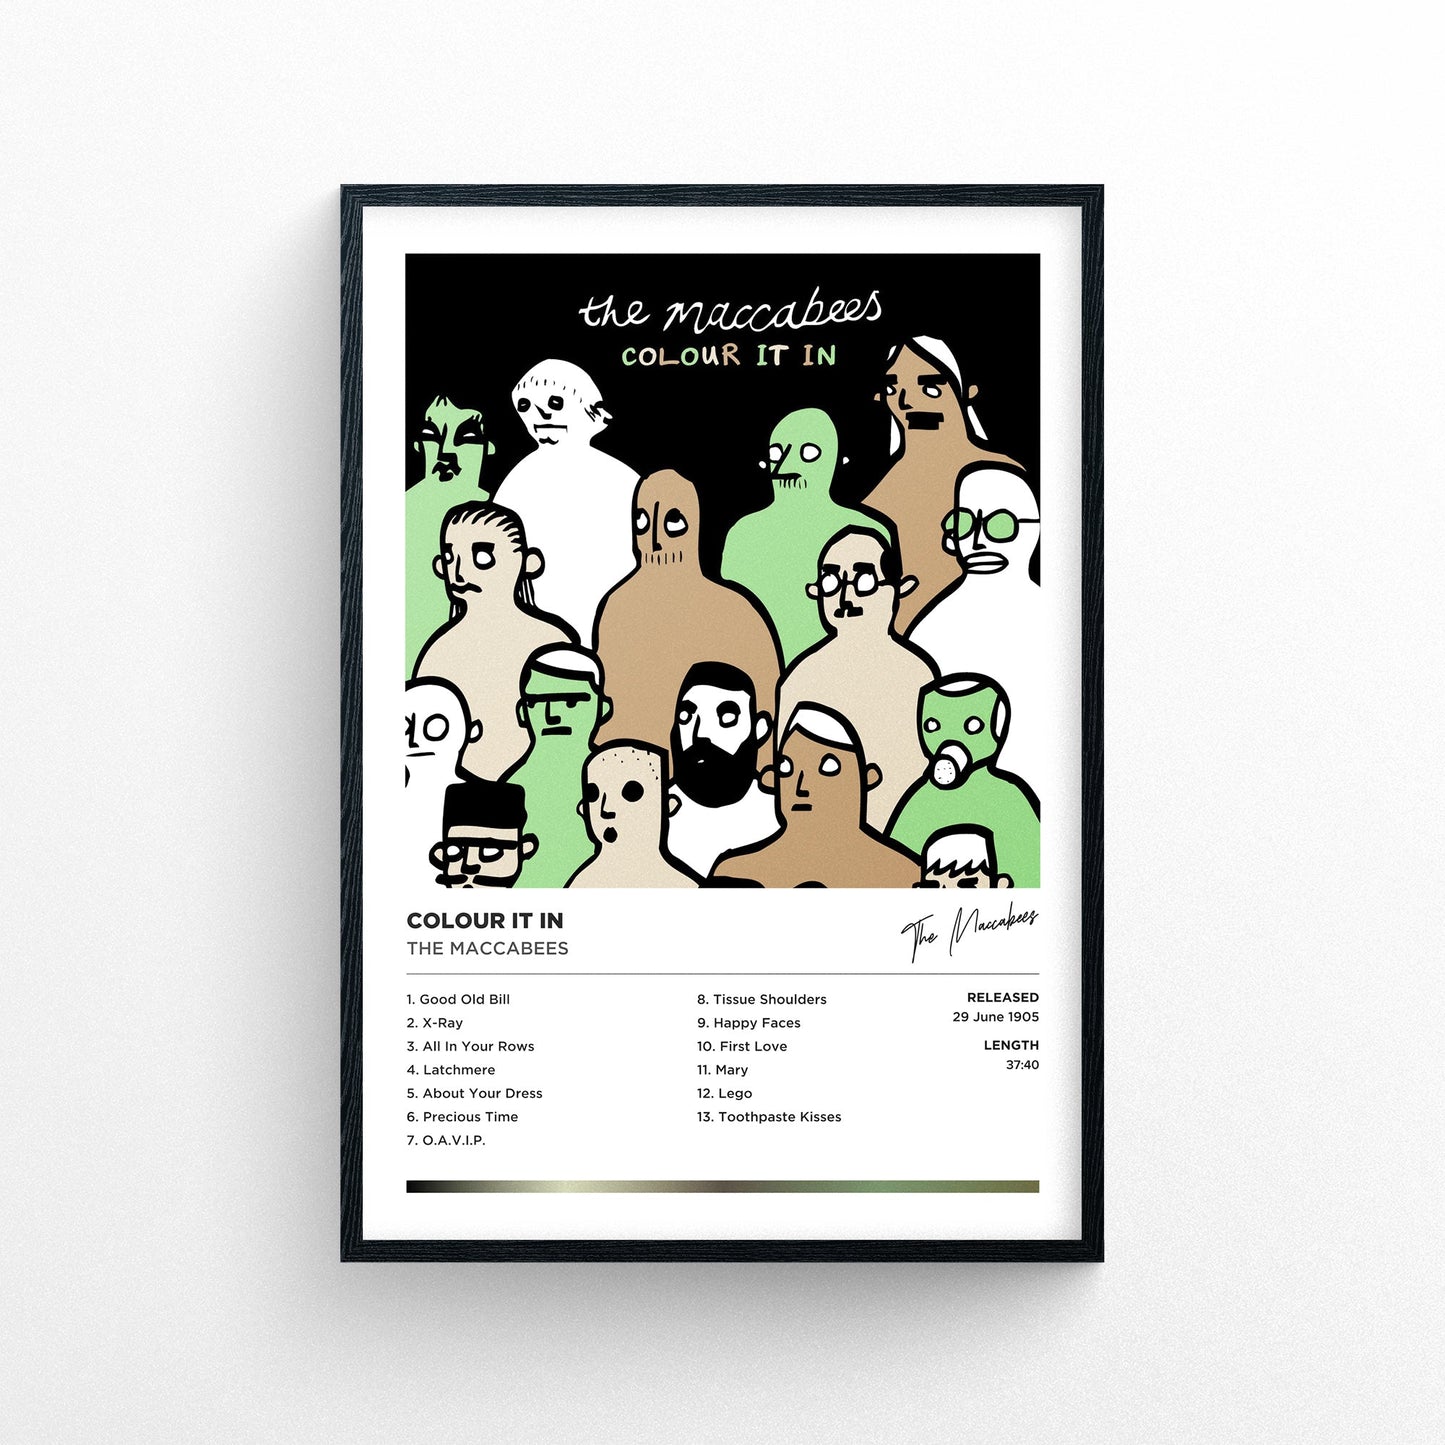 The Maccabees - Colour It In Framed Poster Print | Polaroid Style | Album Cover Artwork